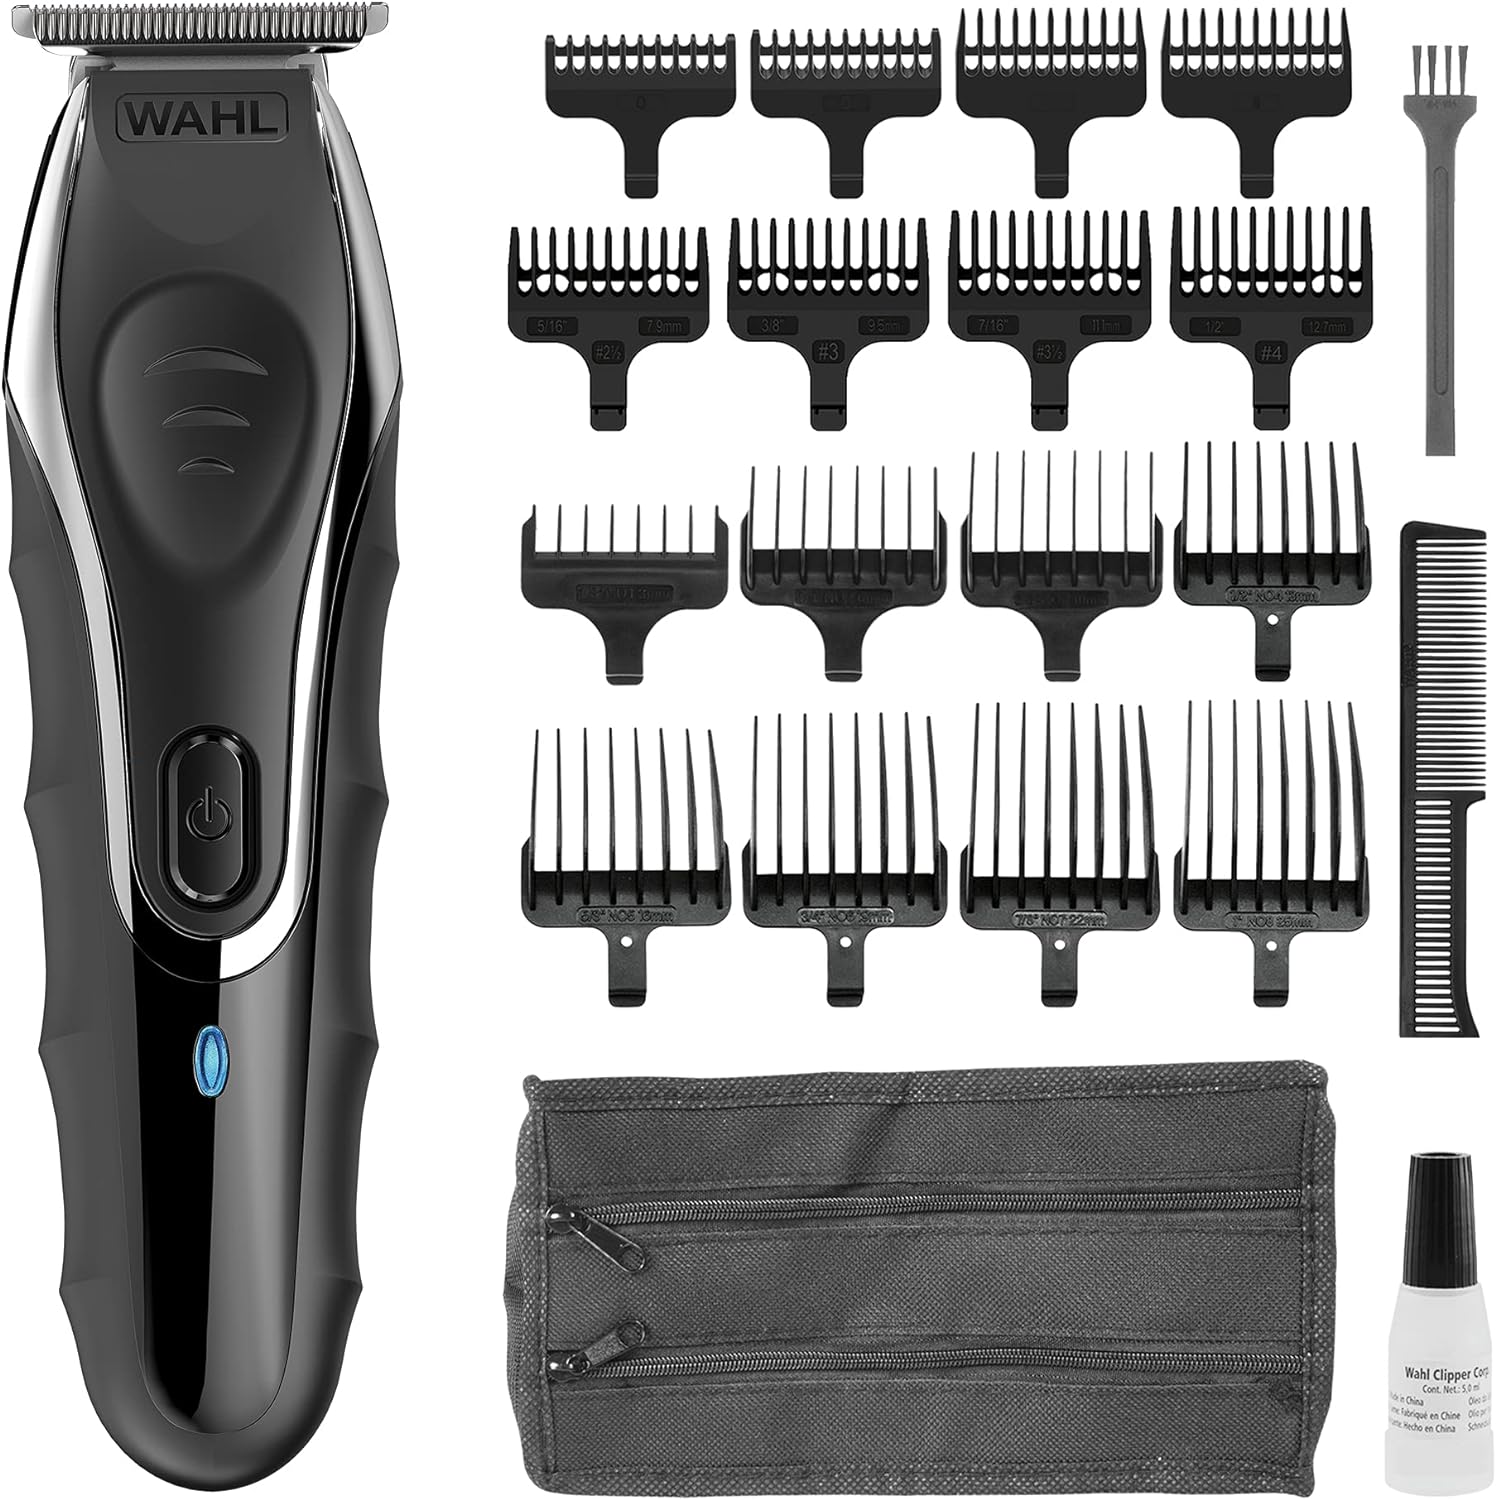 Wahl Aqua Blade Stubble and Beard Trimmer, Trimmers for Men, Stubble Trimmers, Male Grooming Set, Ultra Close Cutting, Fully Washable, Suitable for Wet/Dry Use, Beard Care